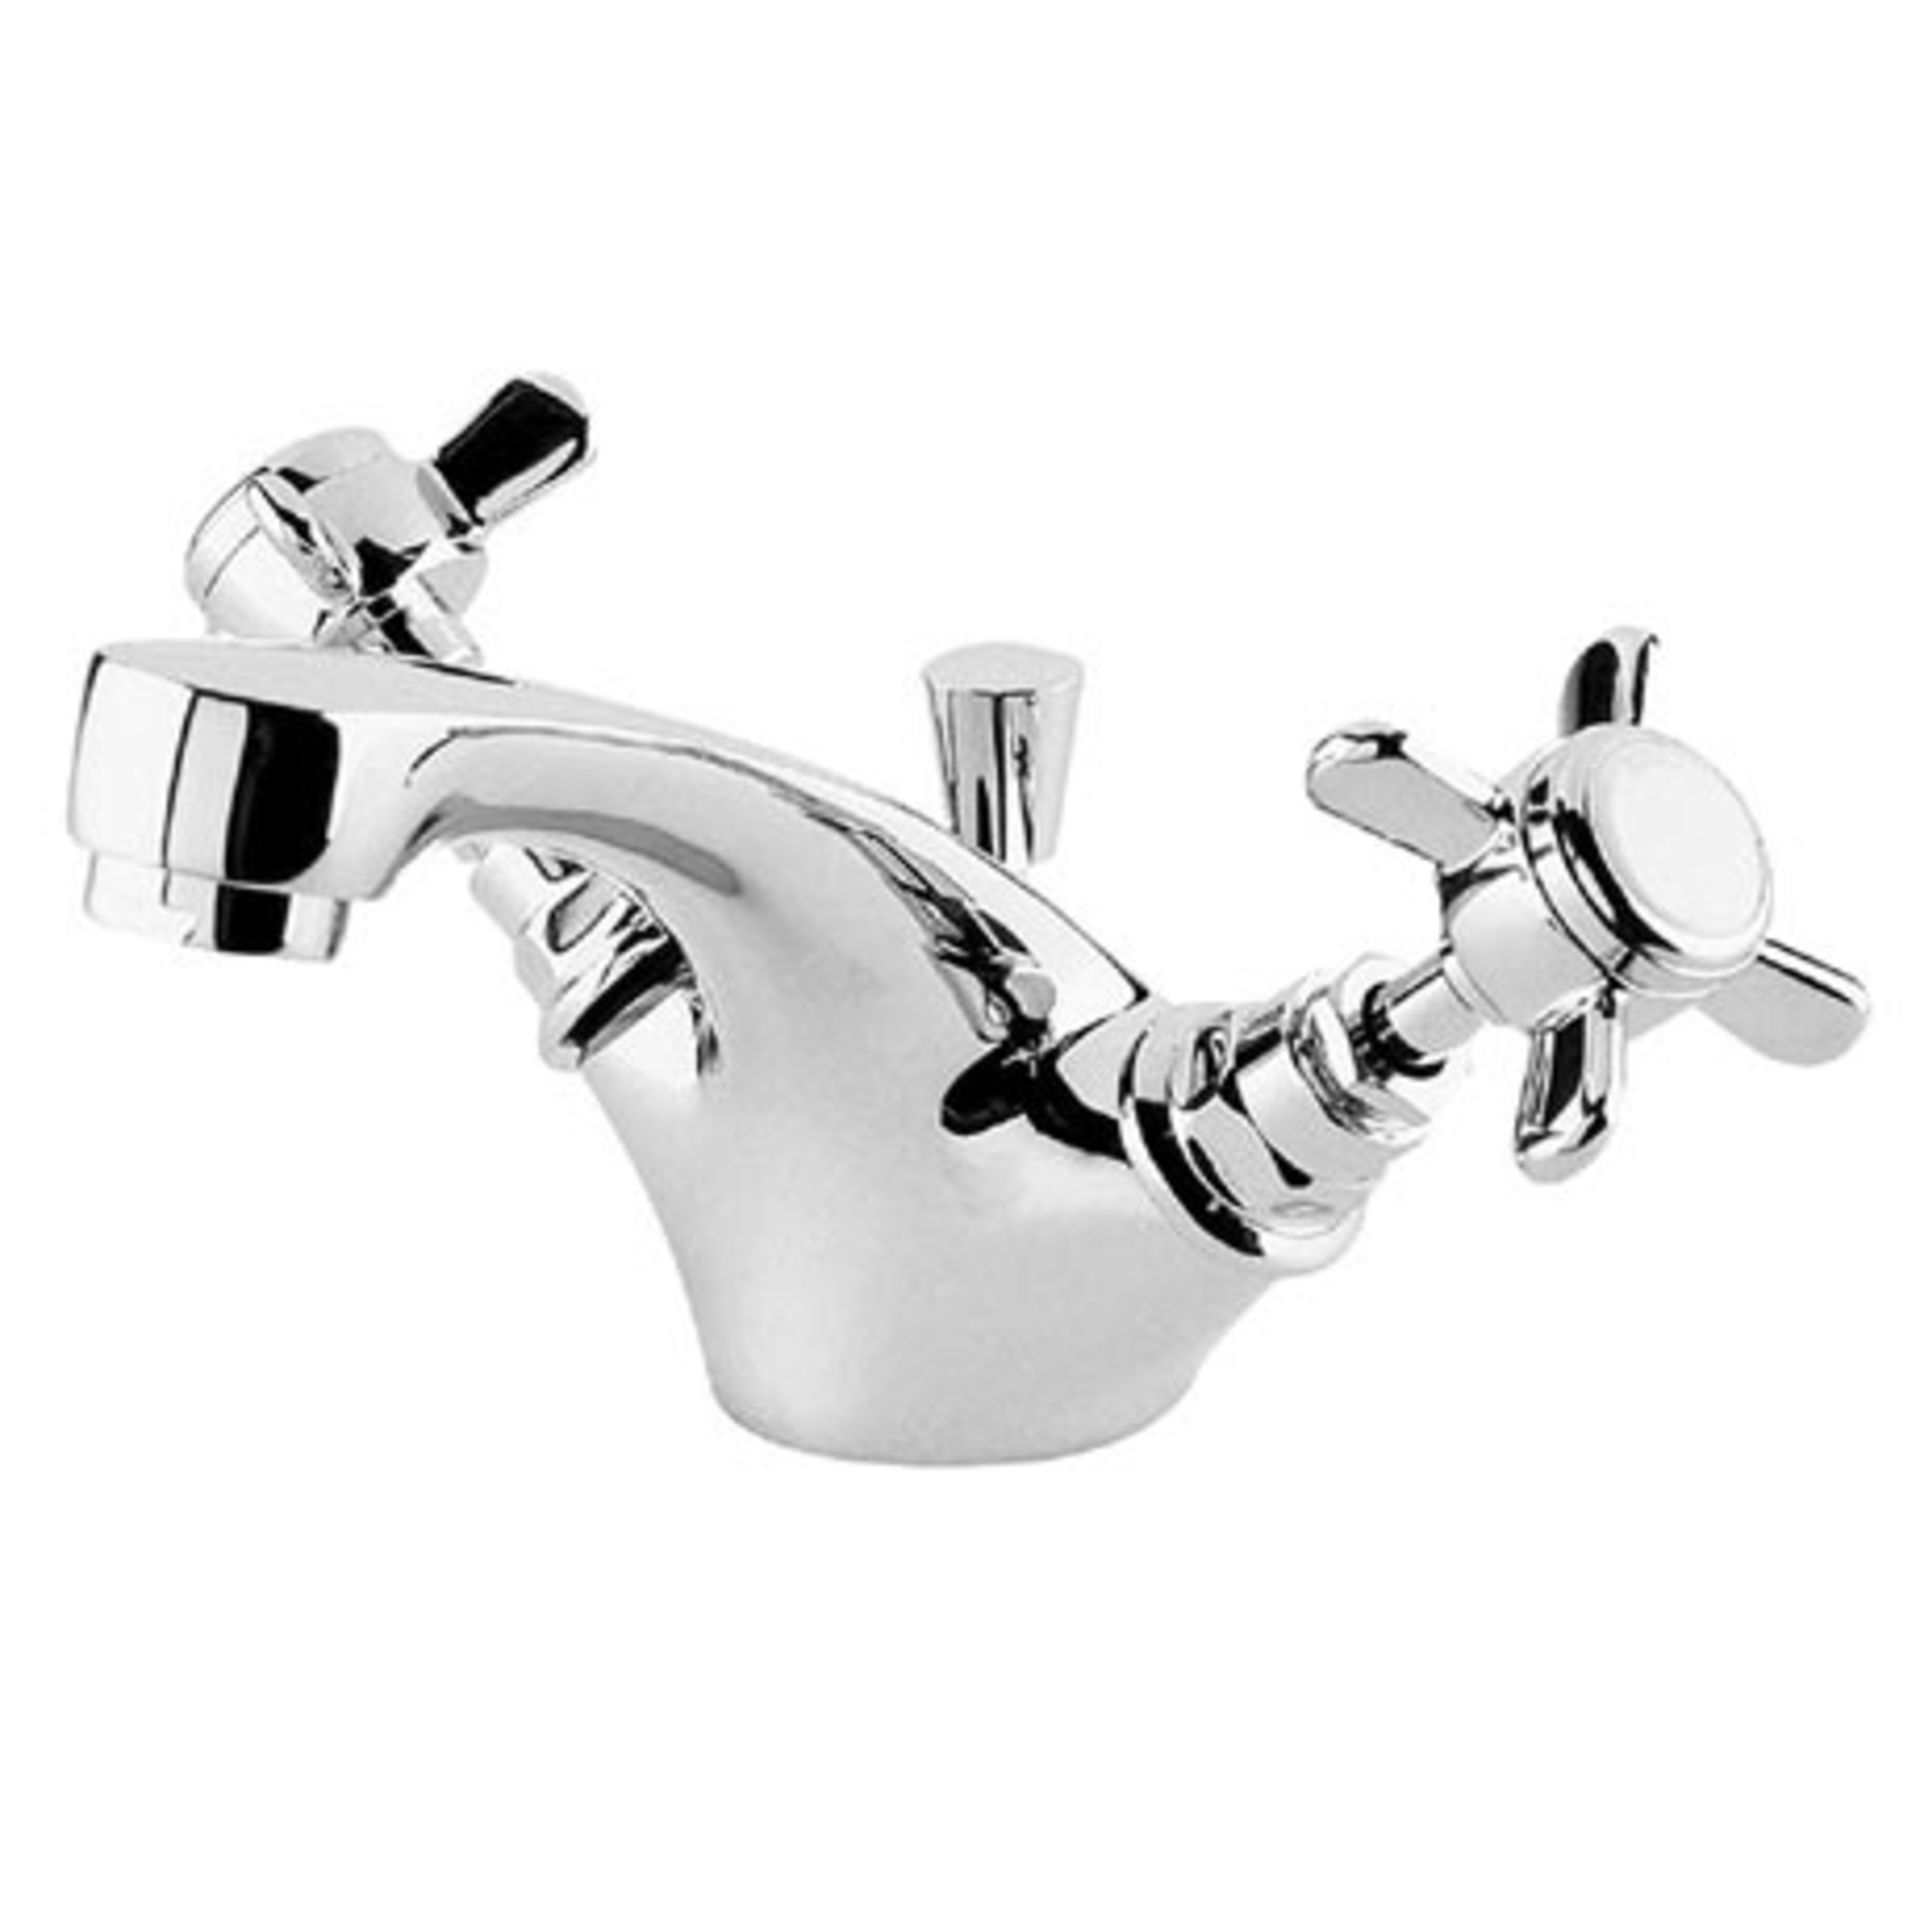 Rrp £195. Balmoral Tradiational Basin Mixer Tap With Pop Up Waste. Appears New Unused.